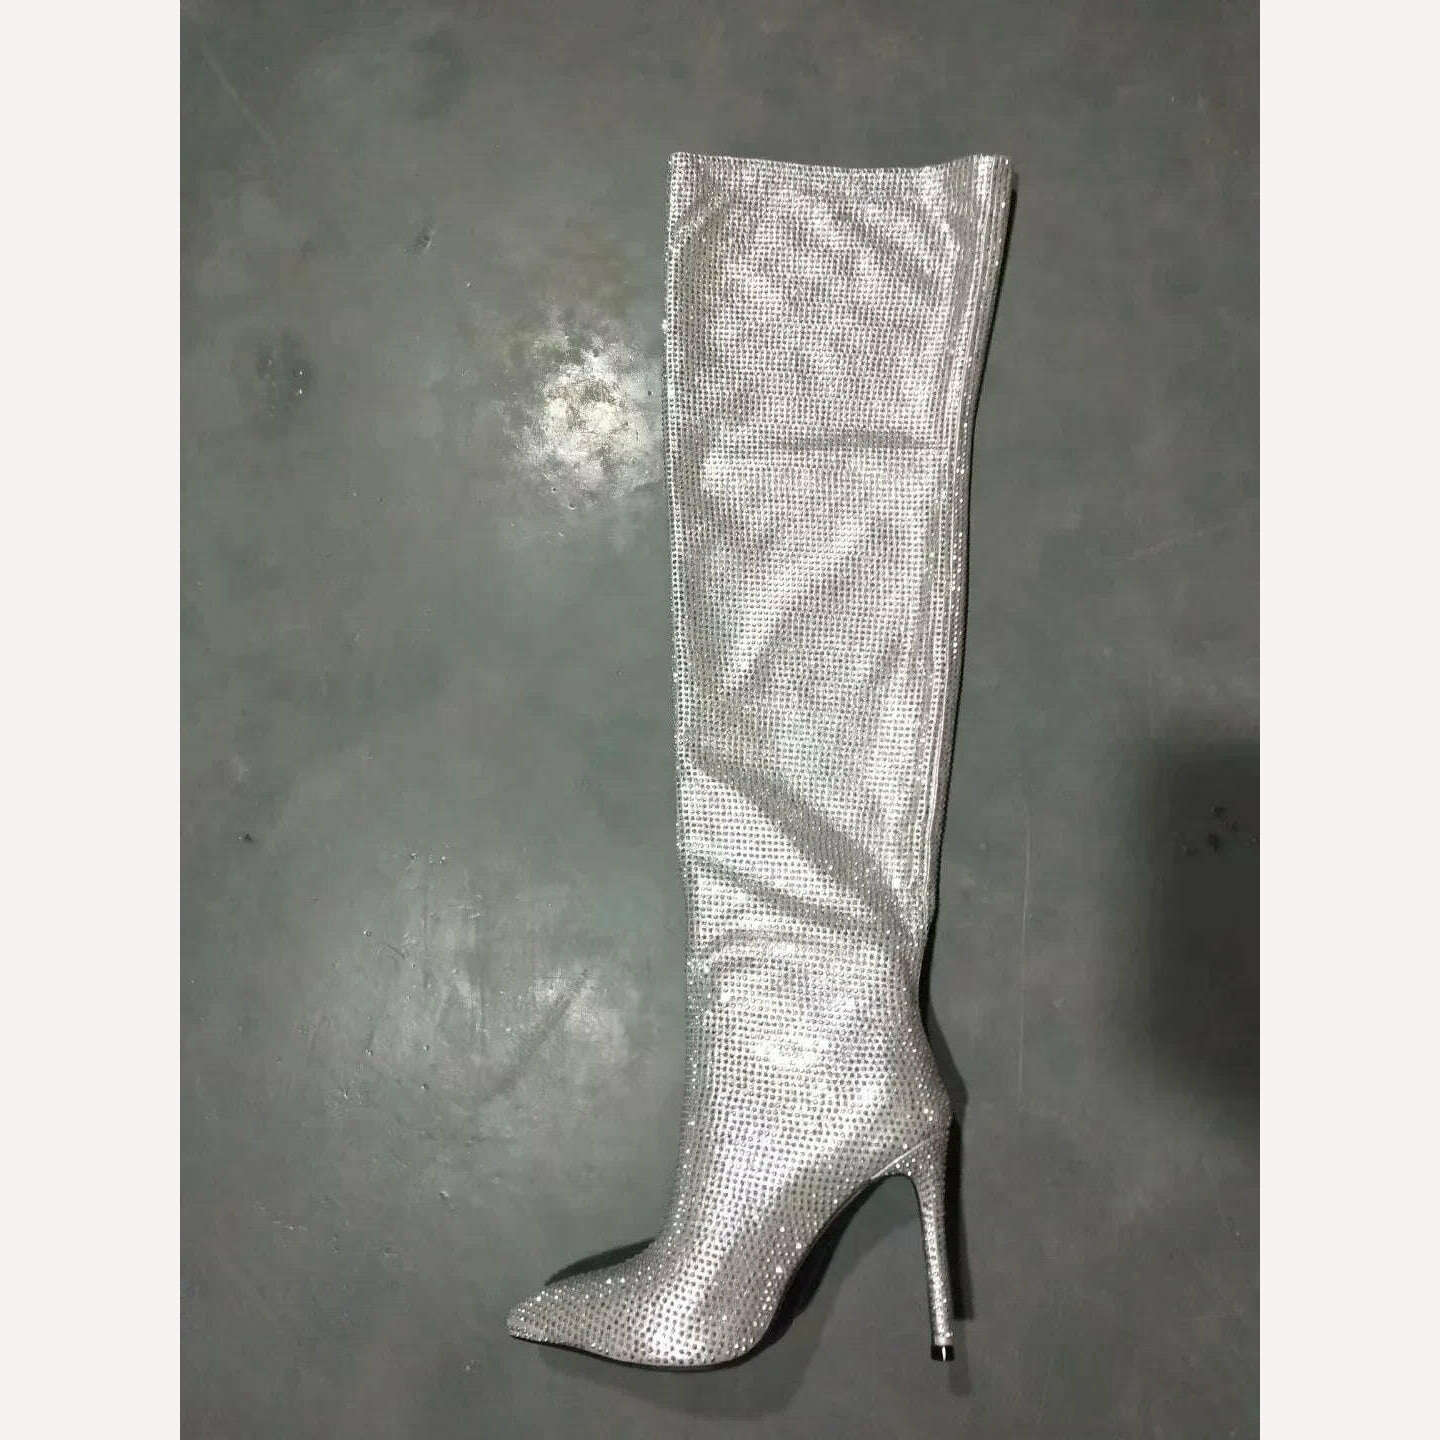 2023 Autumn New Fashion Bling Silver Crystal Over The Knee Boots for Women Sexy Luxury Designer Rhinestone Banquet Shoes 42 43, Silver 6187   8.5cm / 34, KIMLUD Women's Clothes